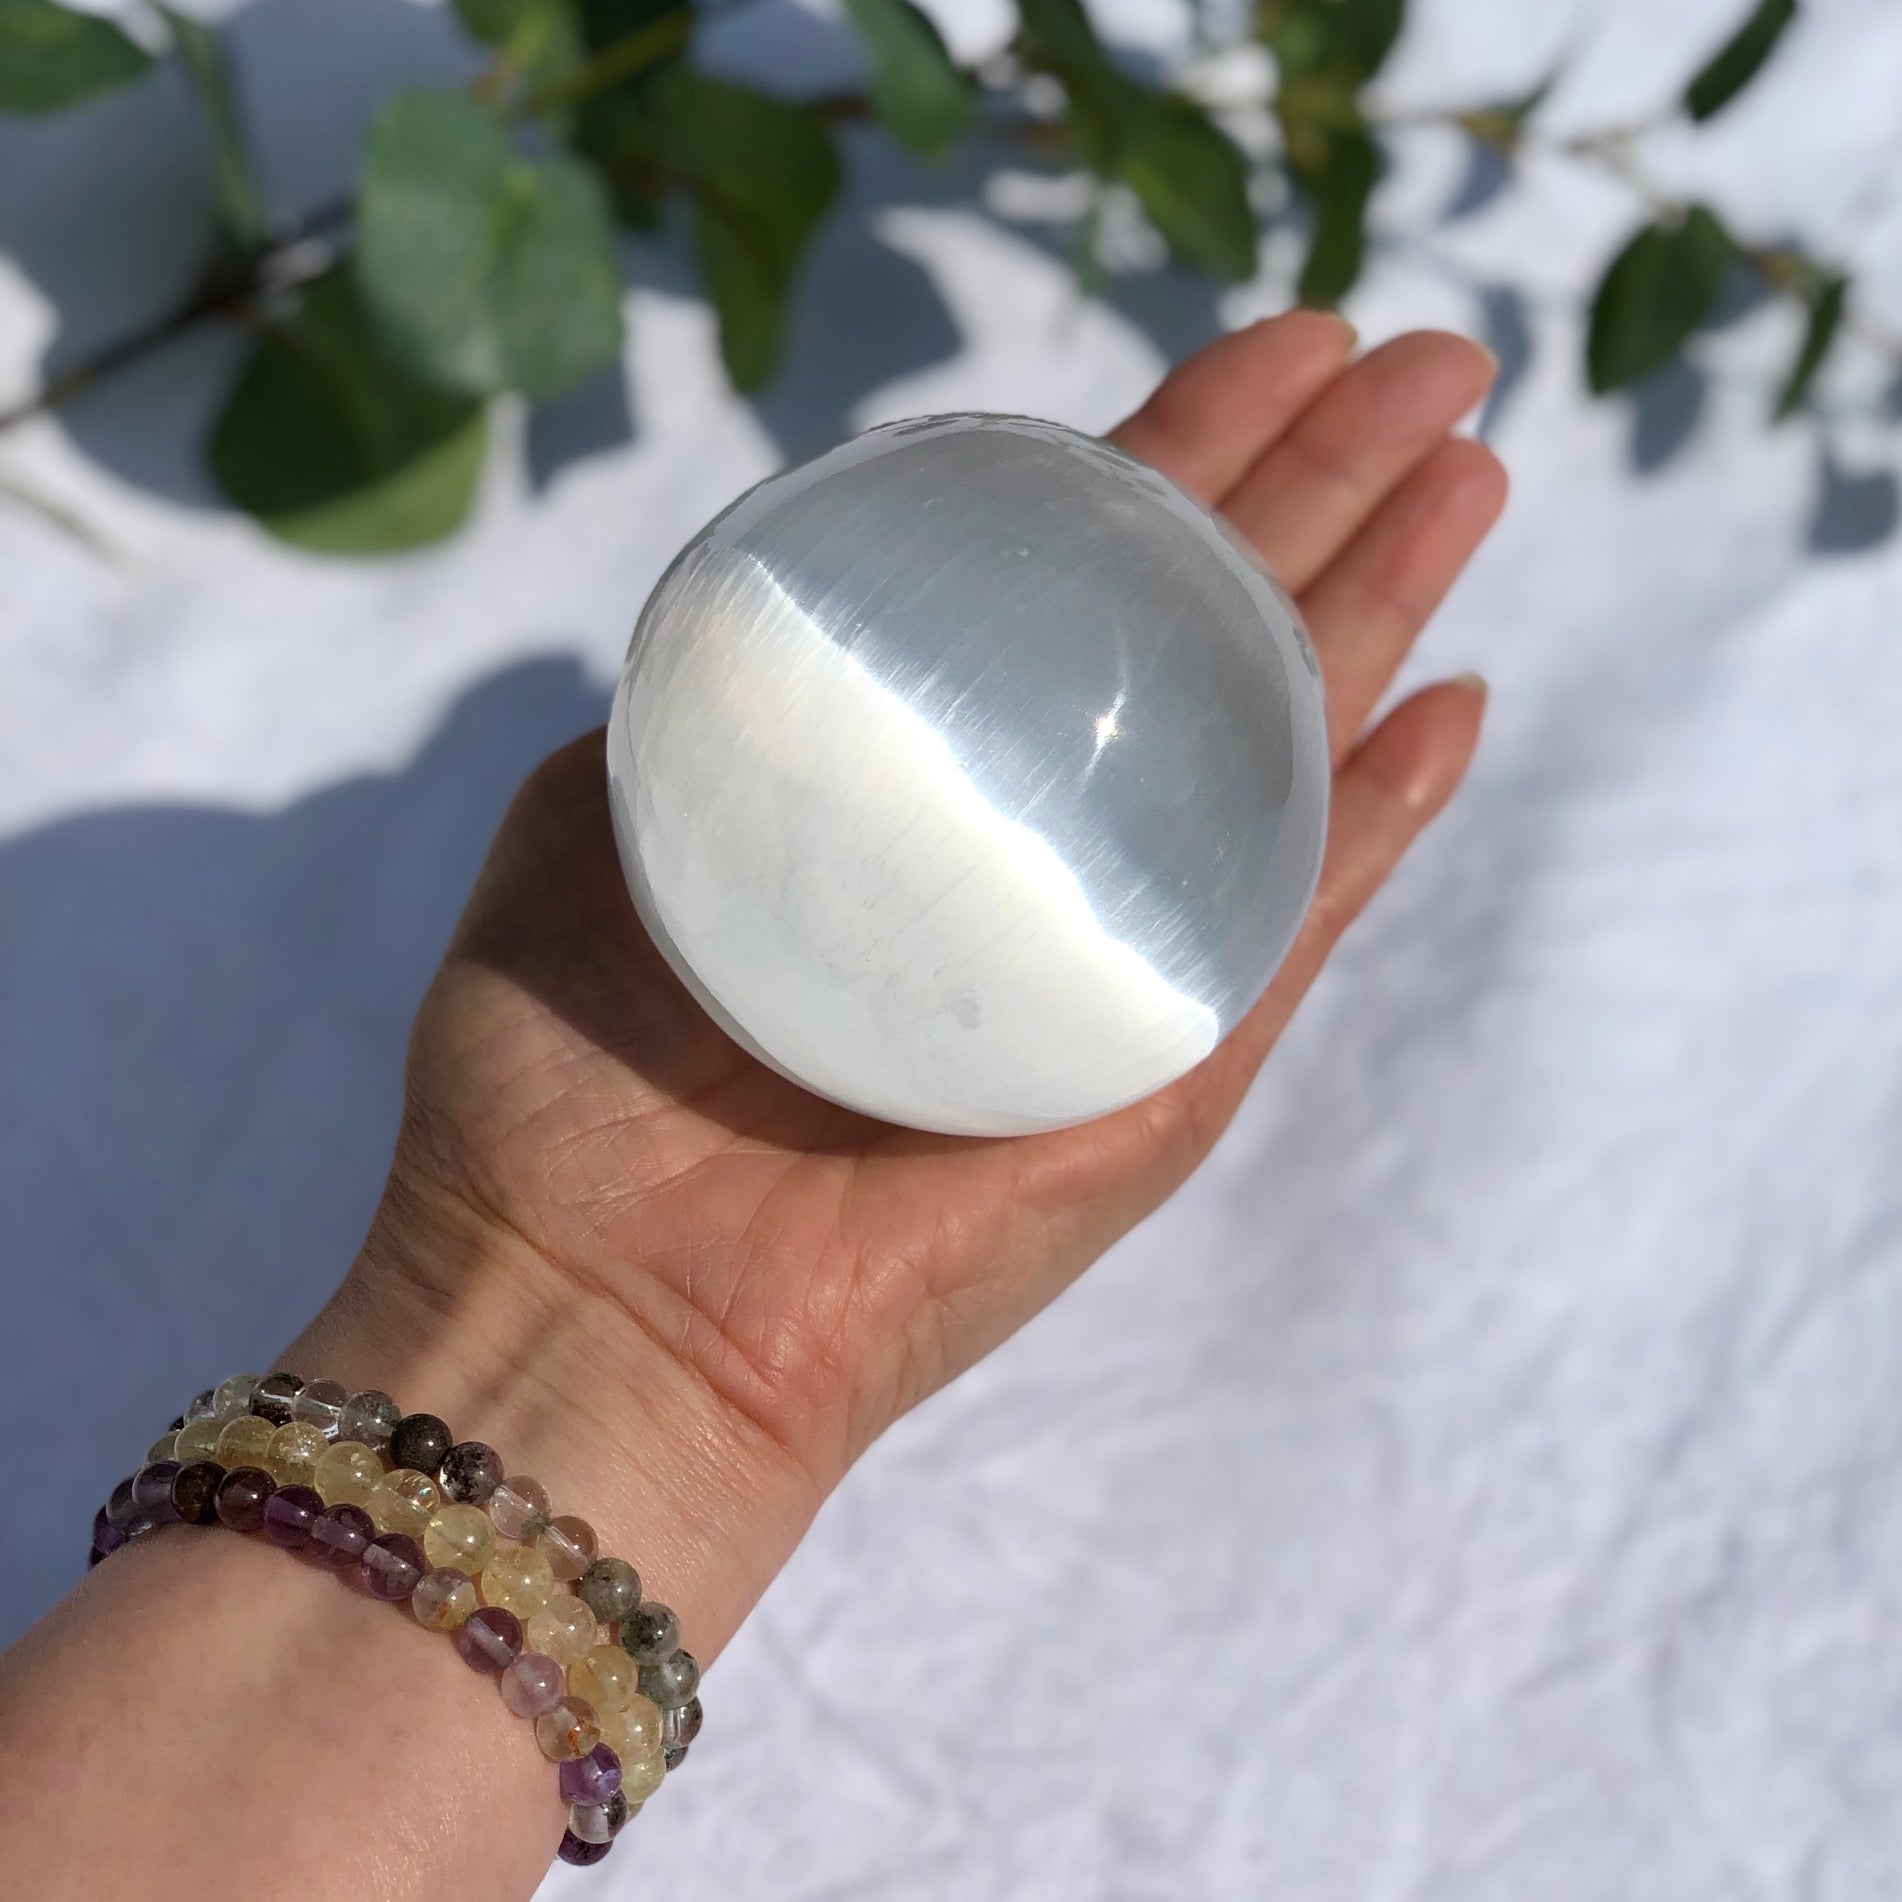 Extra large white and shiny selenite crystal sphere held in an open palm